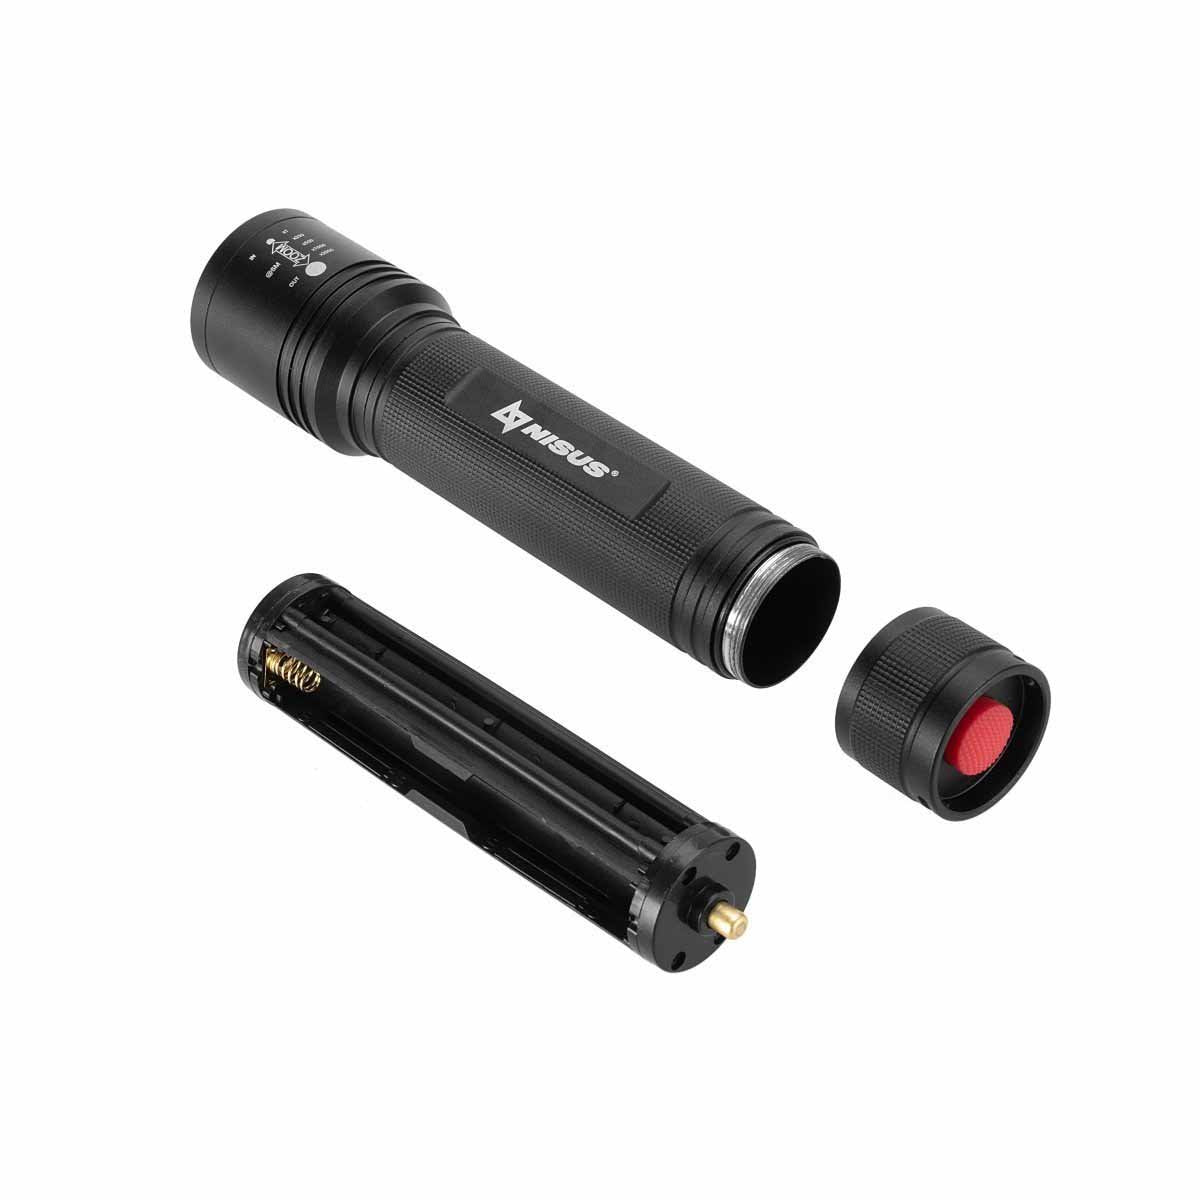 High-Powered LED Handheld Flashlight with Zoom works on alkaline batteries